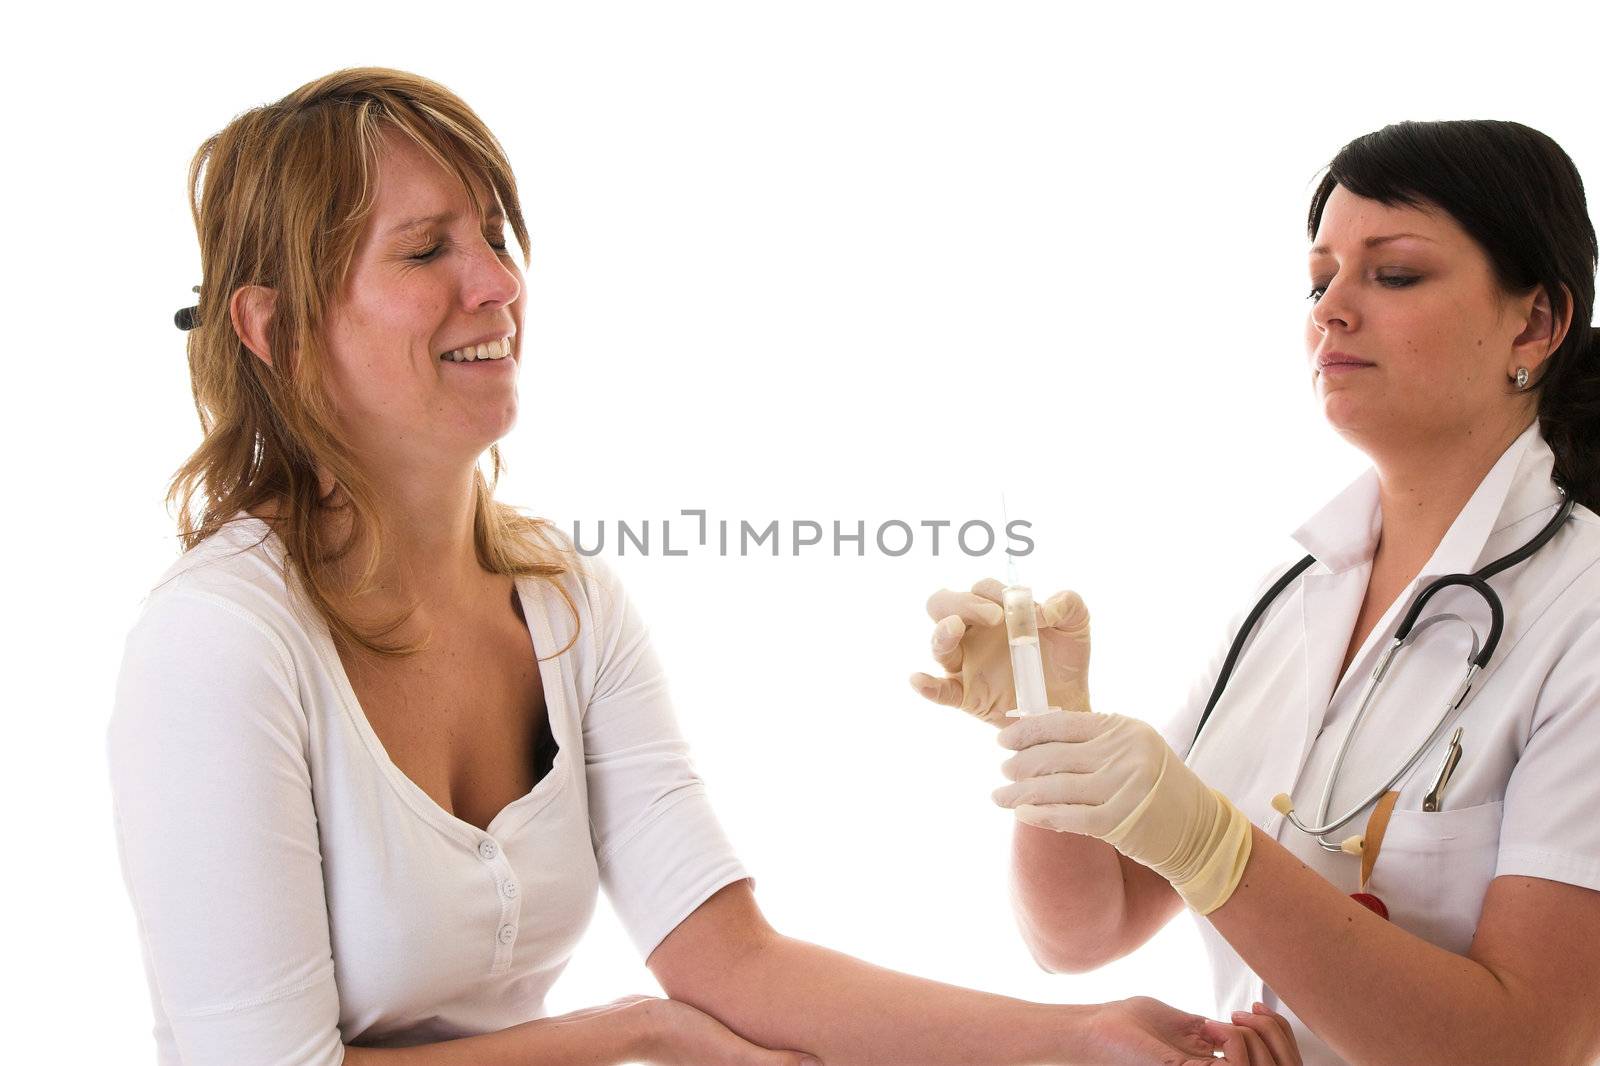 Female patient closing her eyes out of fear for the needle and syringe that the nurse is holding ready to give her an injection